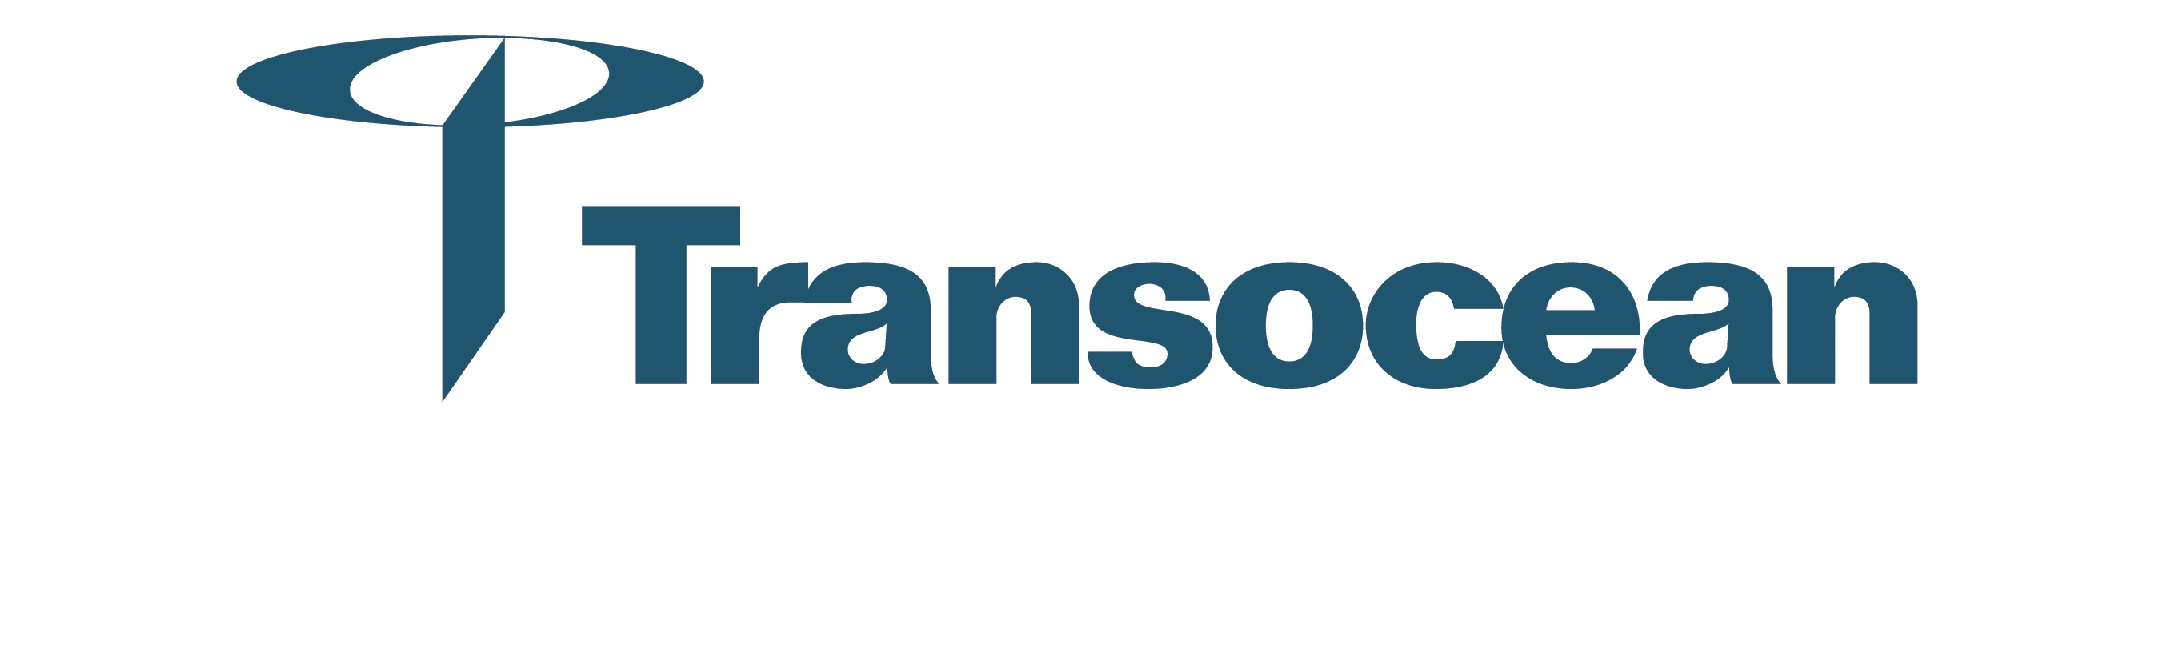 Transocean Services